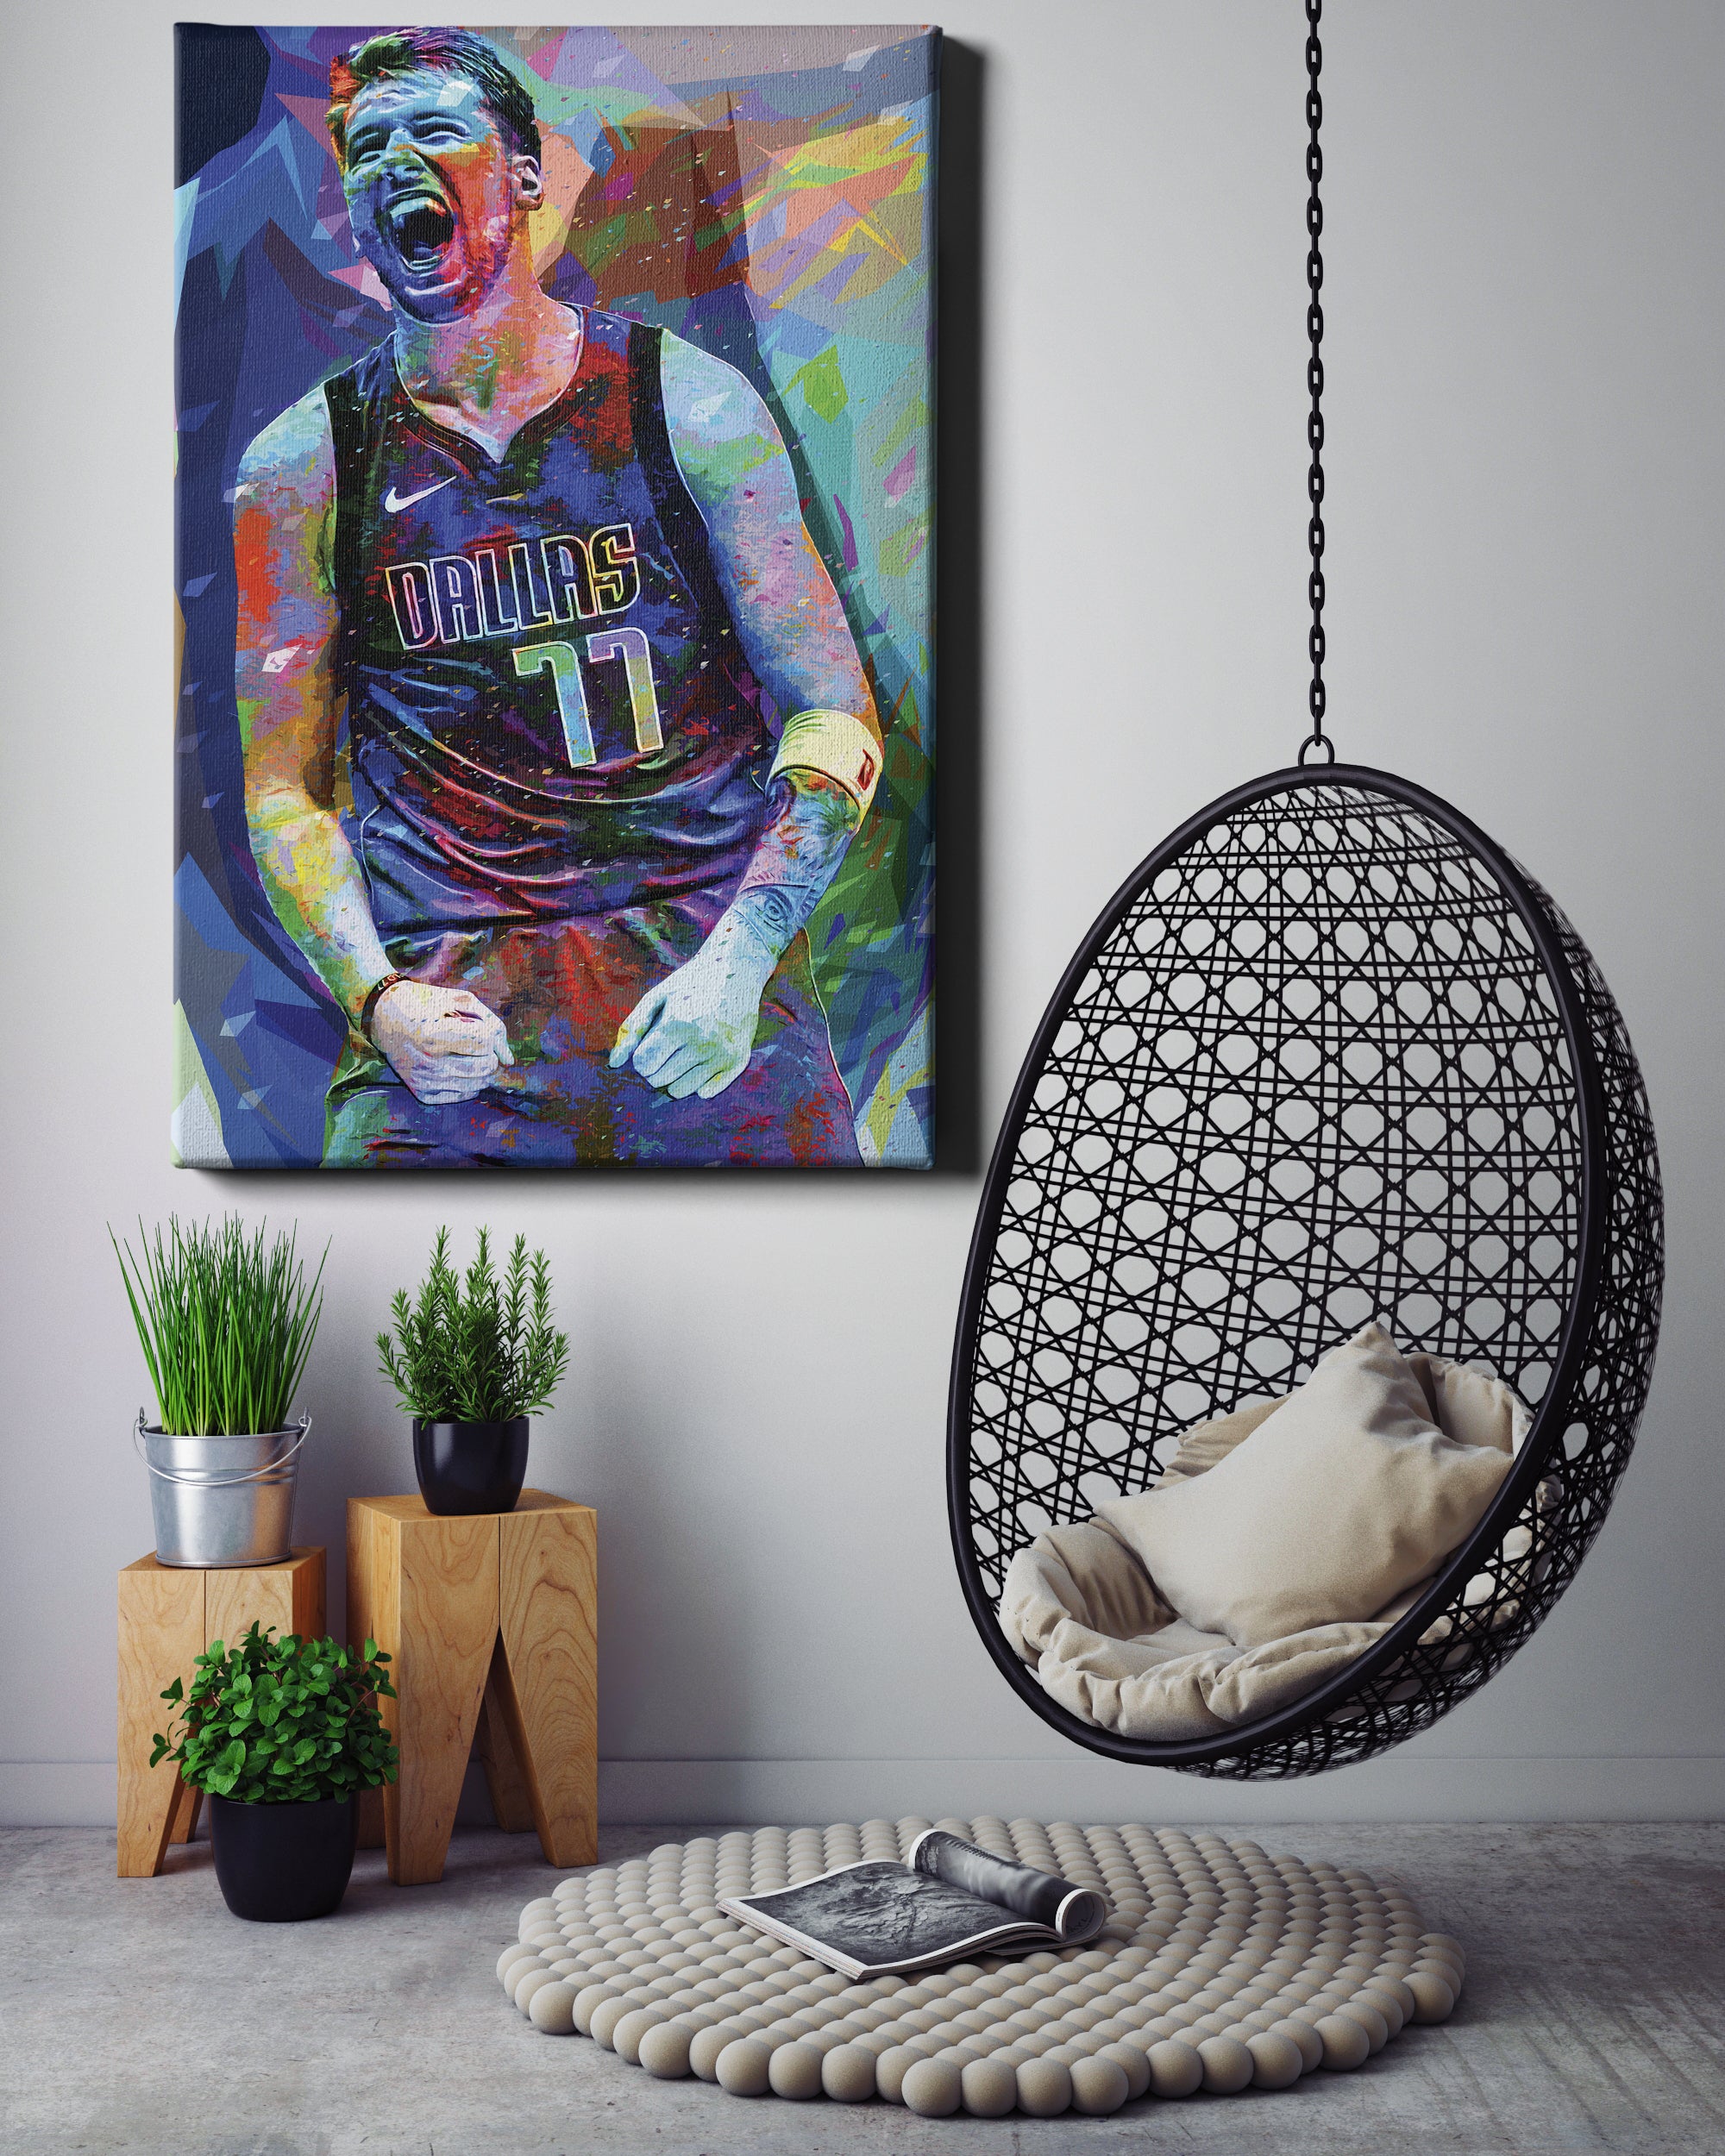  Luka Doncic Posters Basketball Picture 9 Canvas Bedroom Wall  Art Decor Picture Print Offices Dorm Room Decor Gifts  Unframe:12x18inch(30x45cm): Posters & Prints